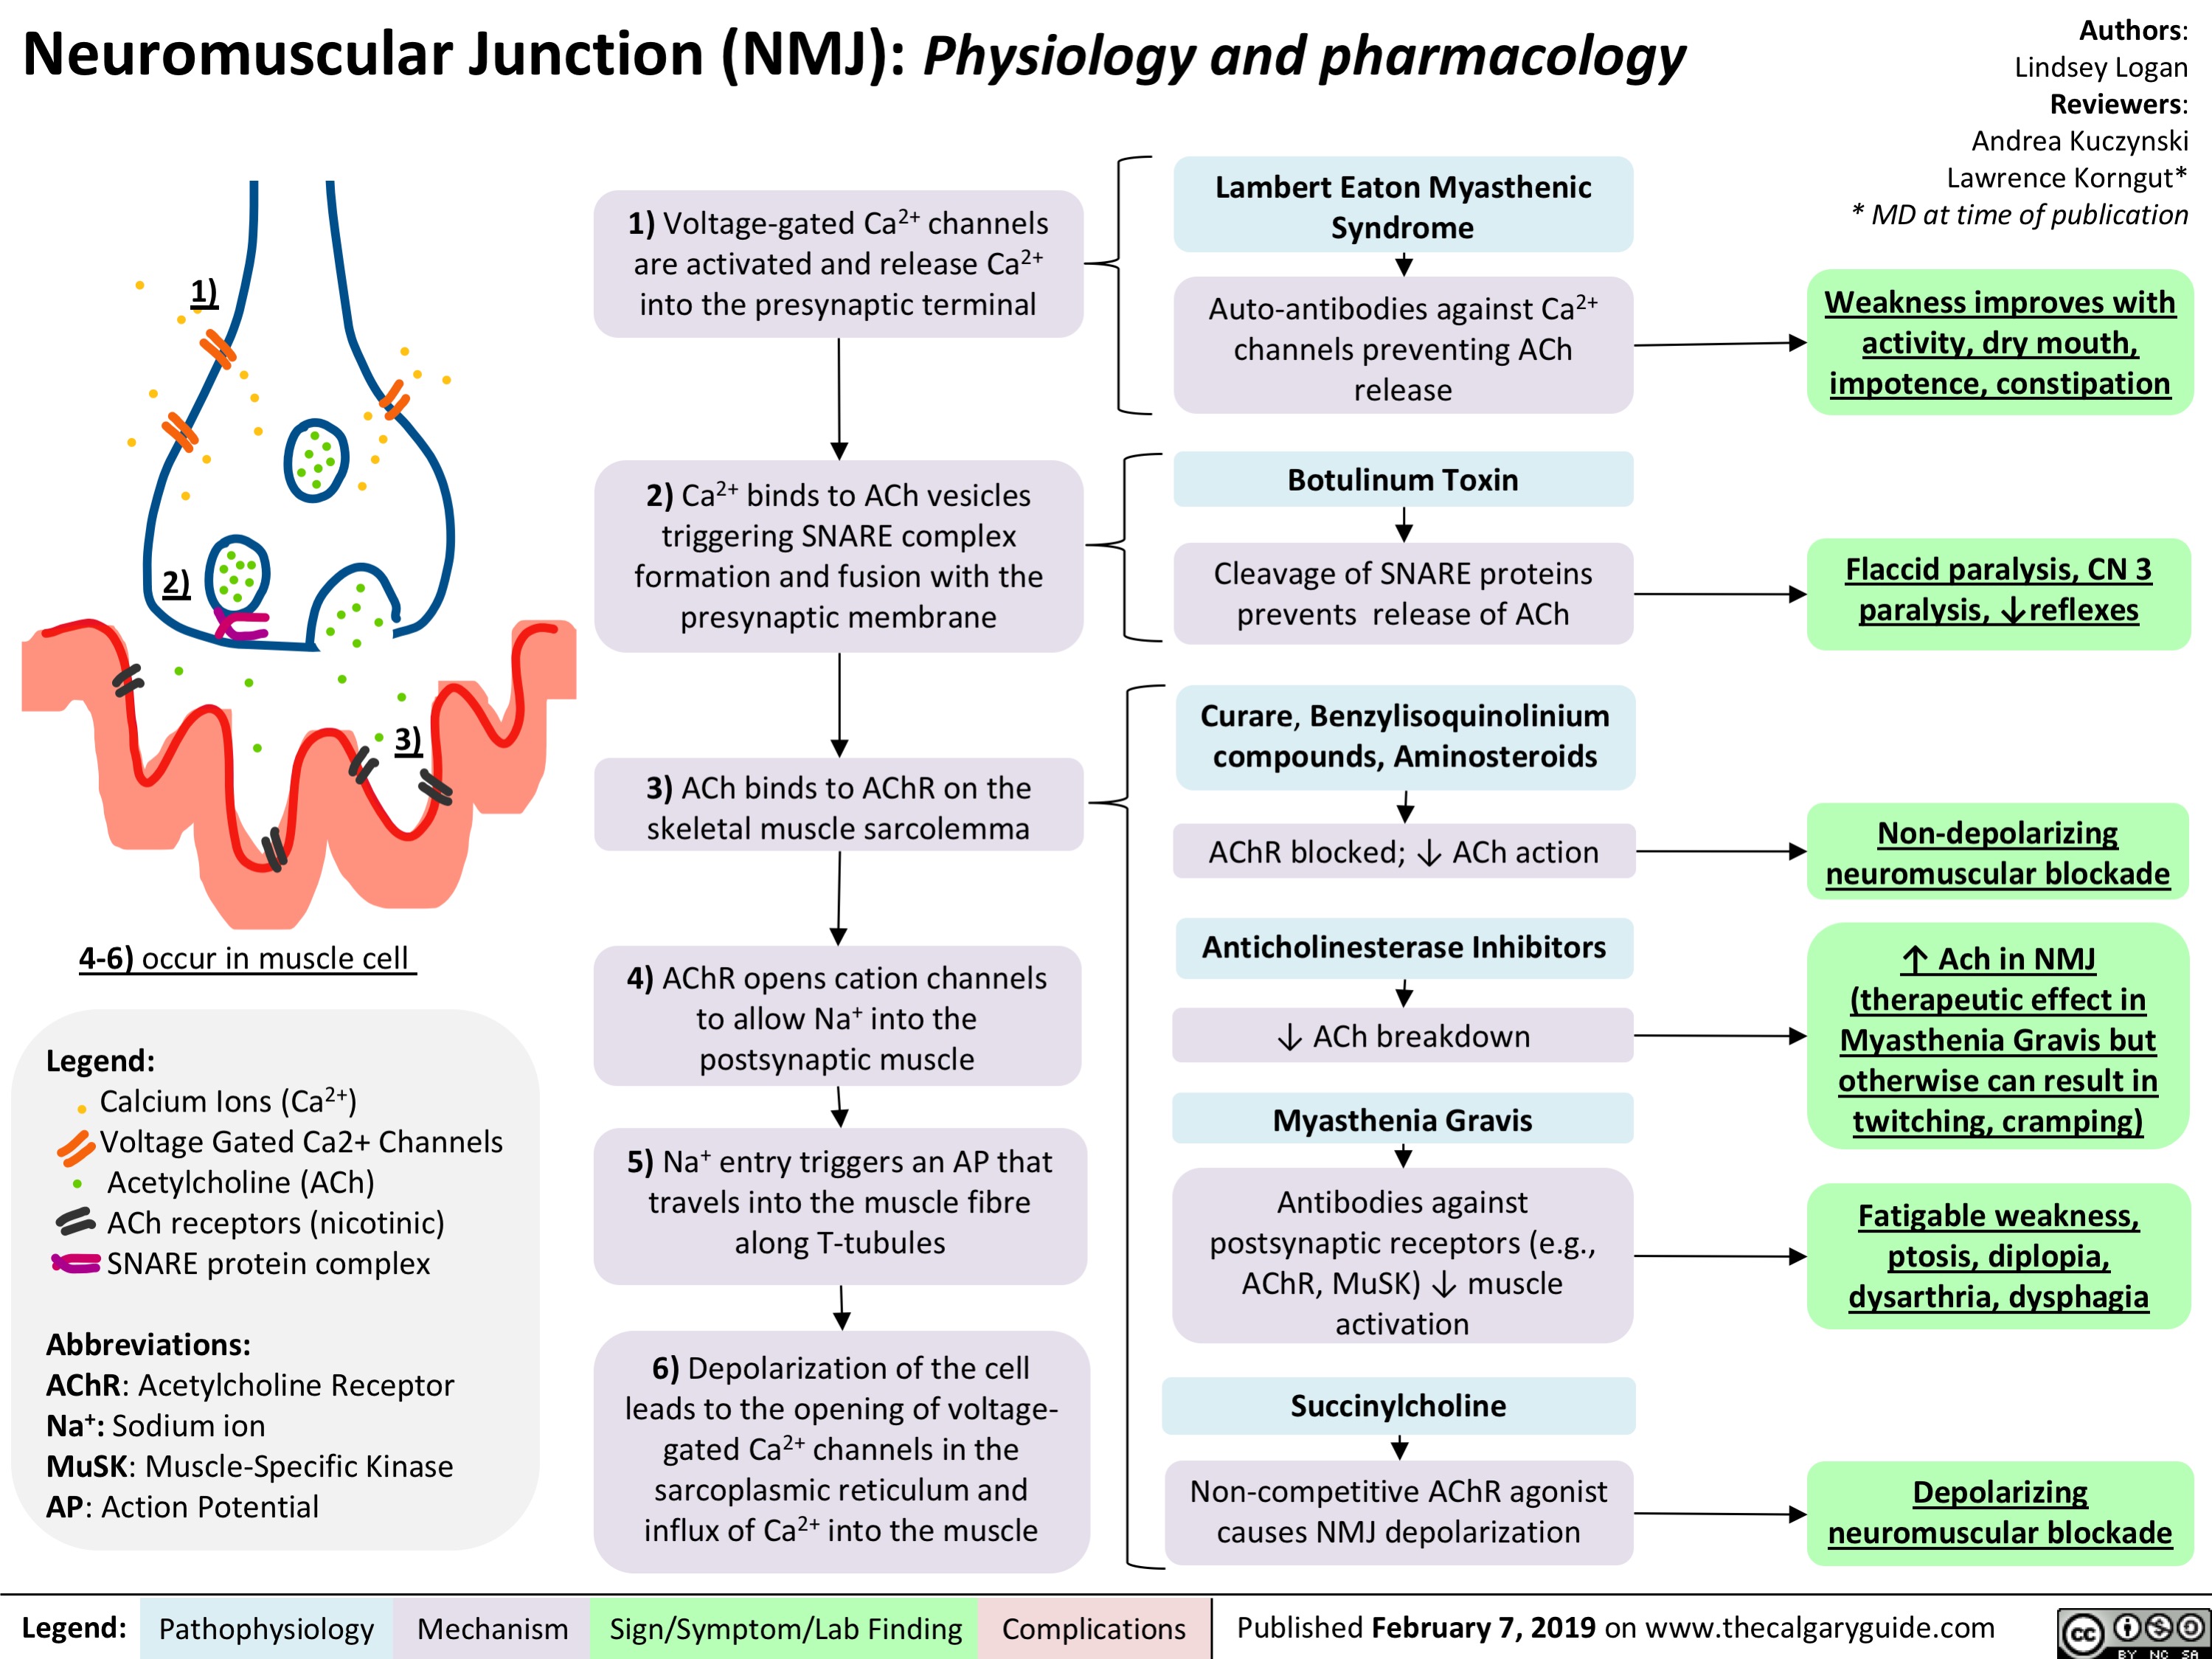 Neuromuscular Junction (NMJ)- Physiology and pharmacology calcium ion ions voltage gated ca2+ channels acetylcholine ACh receptors nicotinic SNARE protein complex AChR receptor sodium muscle specific kinase action potential voltage gated Ca2+ channels activated release presynaptic terminal binds 